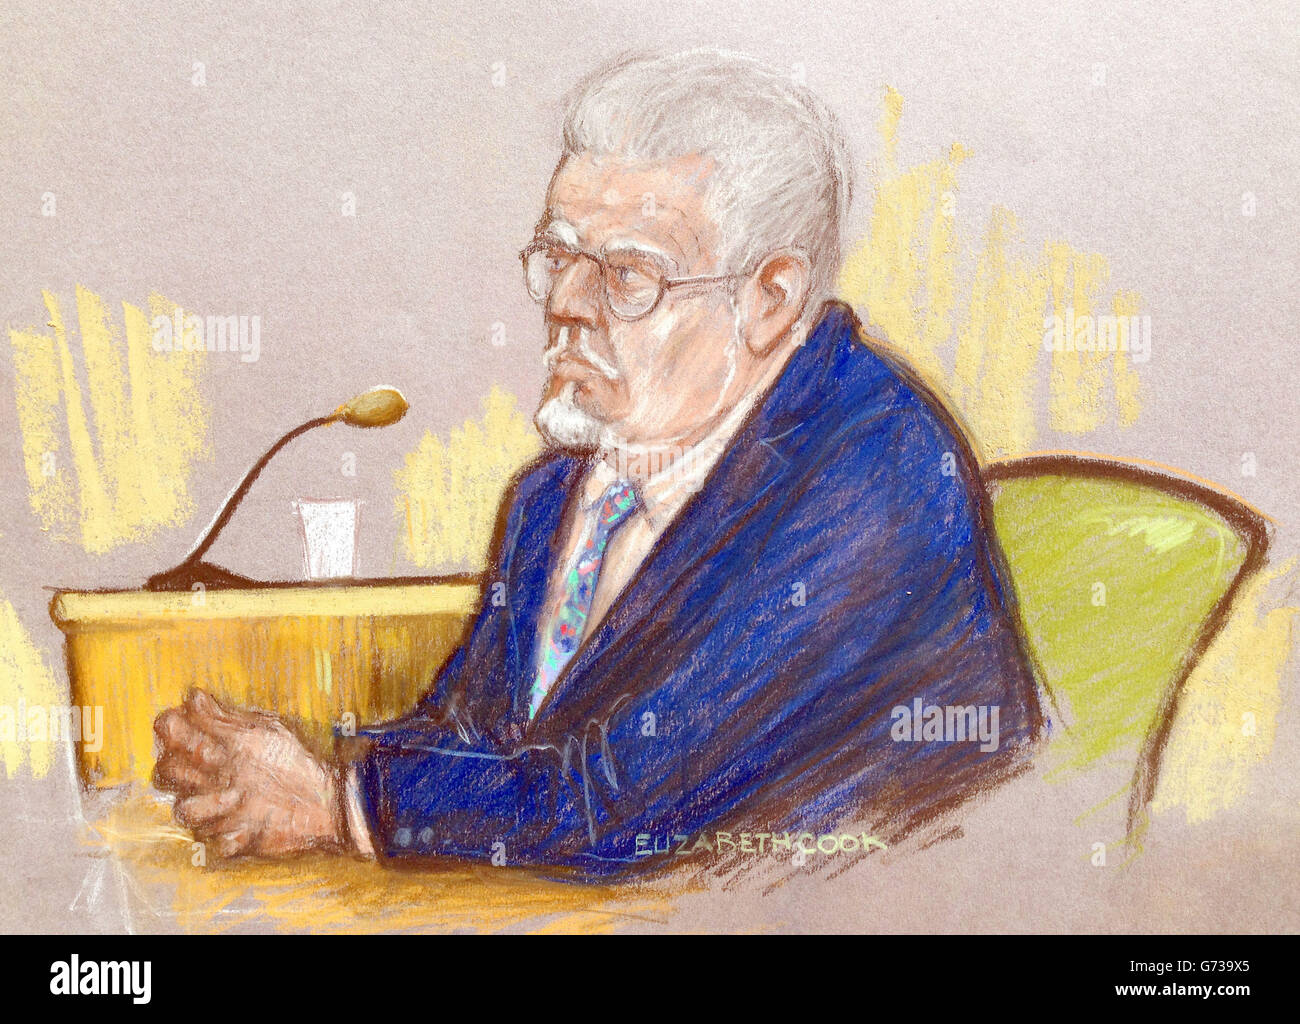 Court artist sketch by Elizabeth Cook of Rolf Harris as he answers questions during his cross-examination by prosecutor Sasha Wass QC at Southwark Crown Court, London where he denies 12 counts of indecent assault between 1968 and 1986. Stock Photo